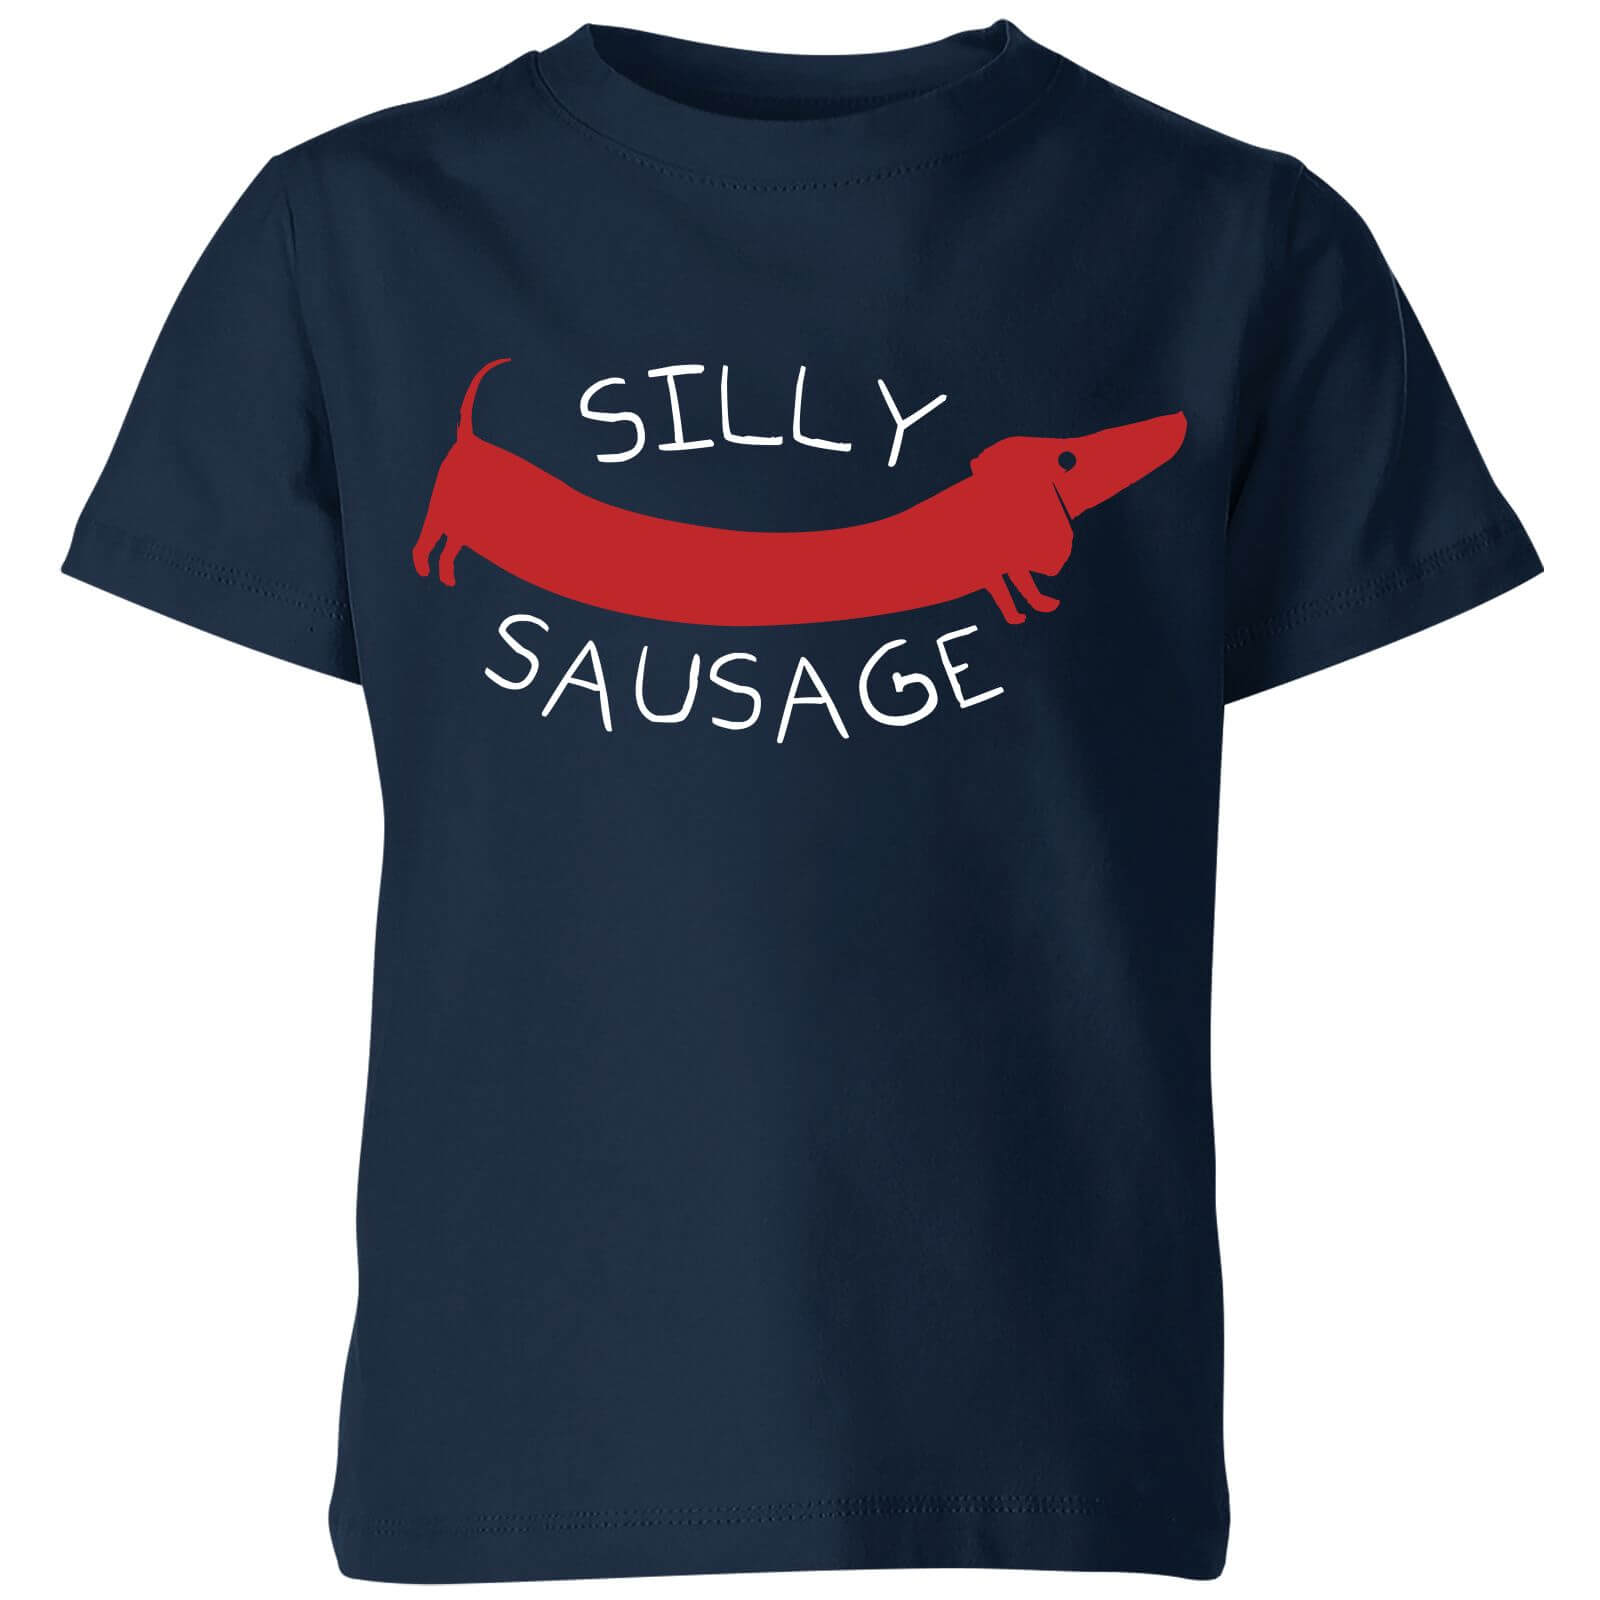 My Little Rascal Silly Sausage Kids' T-Shirt - Navy - 3-4 Years